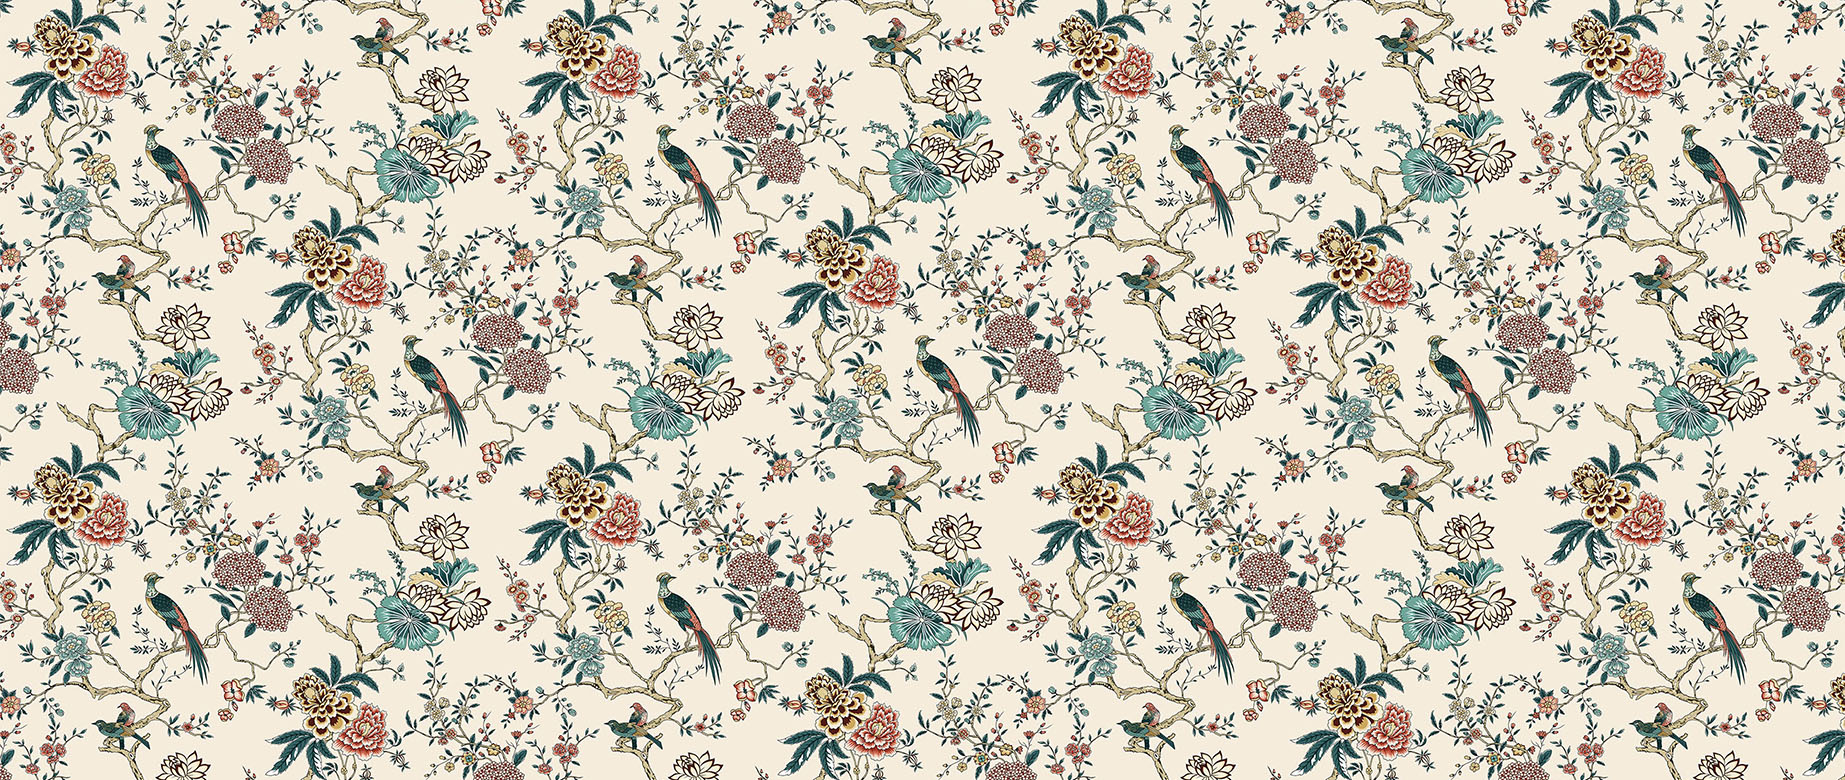 chinoiserie-pattern-with-birds-and-flowers-wallpaper-wide-view